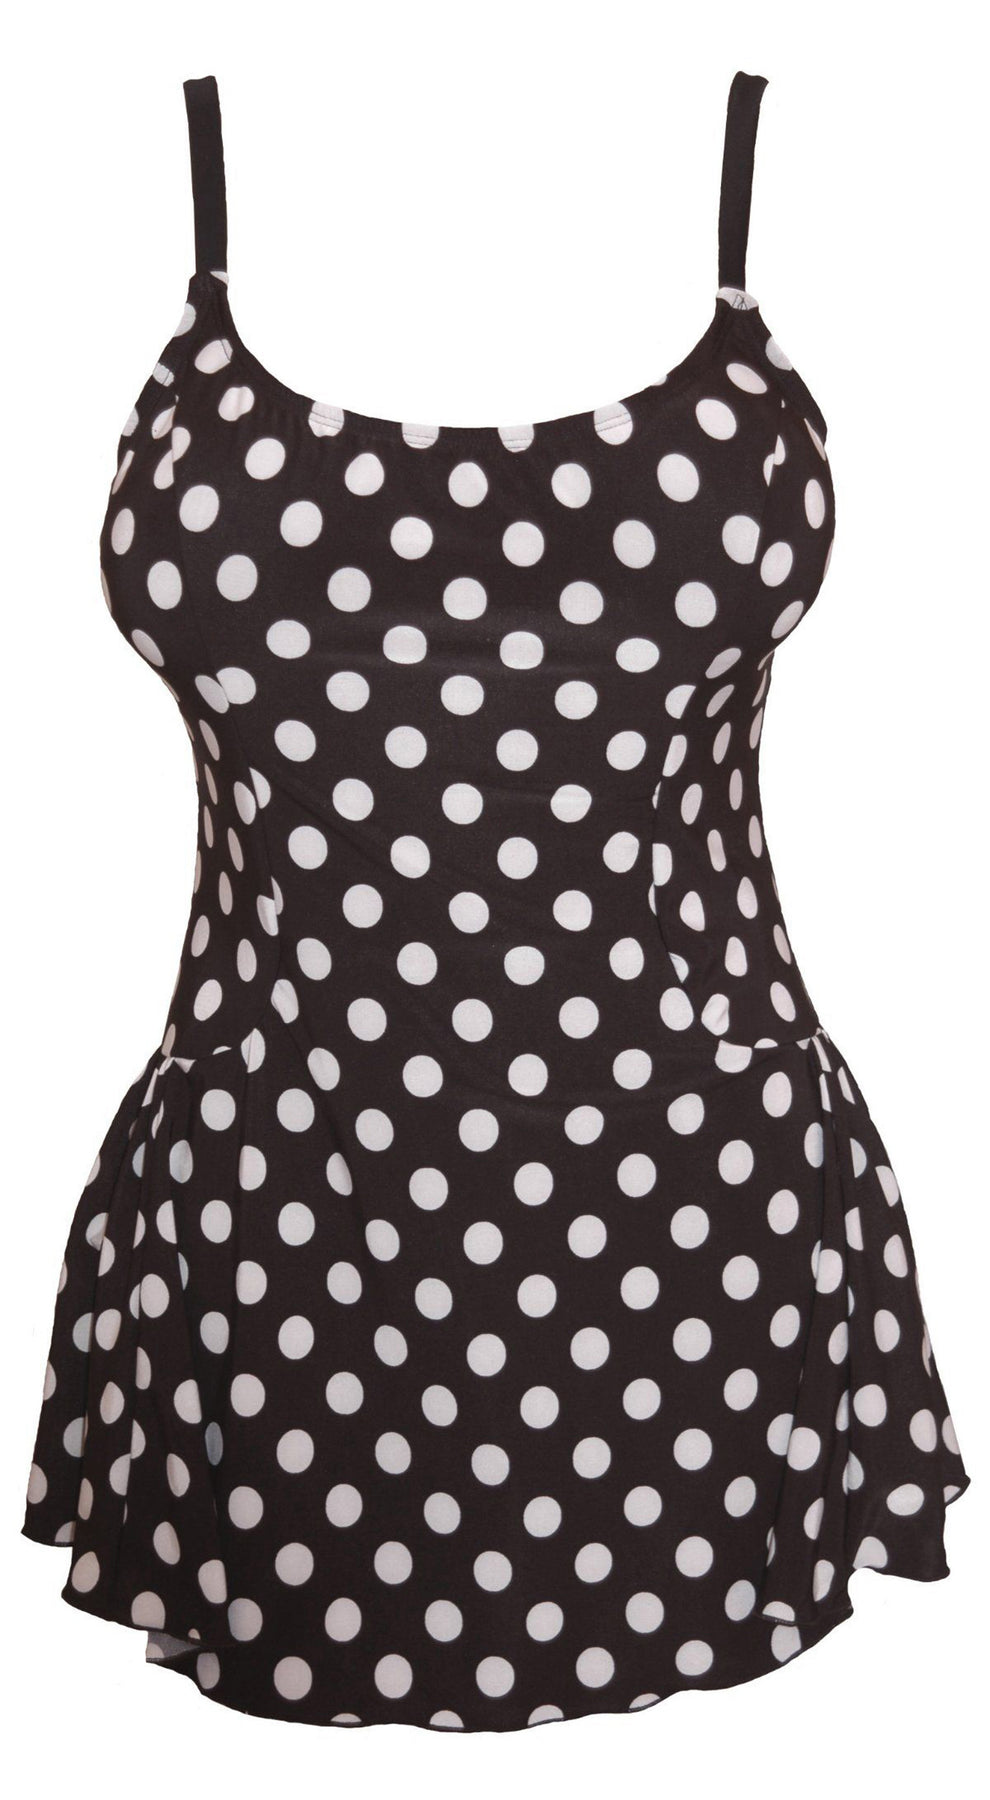 The Polka Dots Swimsuit – FunFash